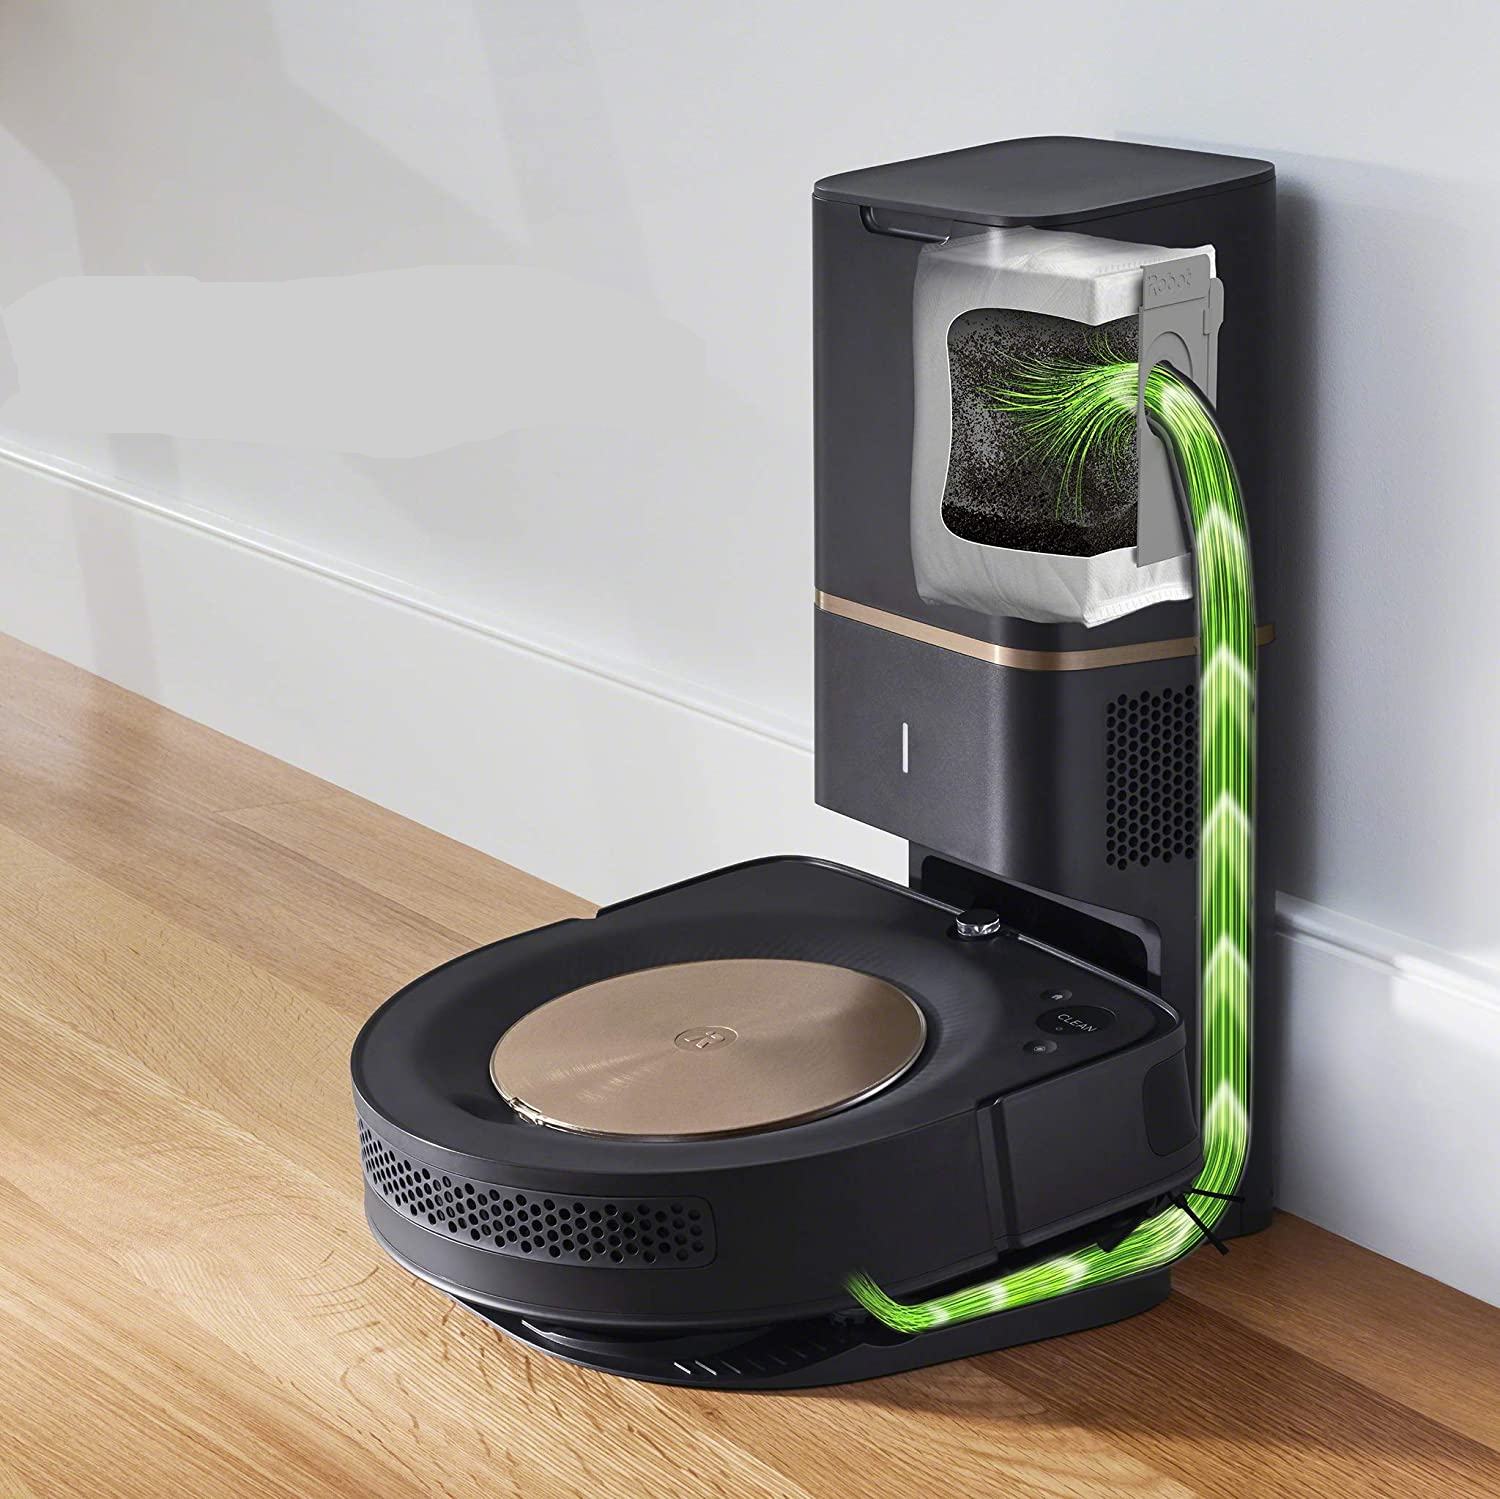 5 things you need to know before buying your first Roomba robot